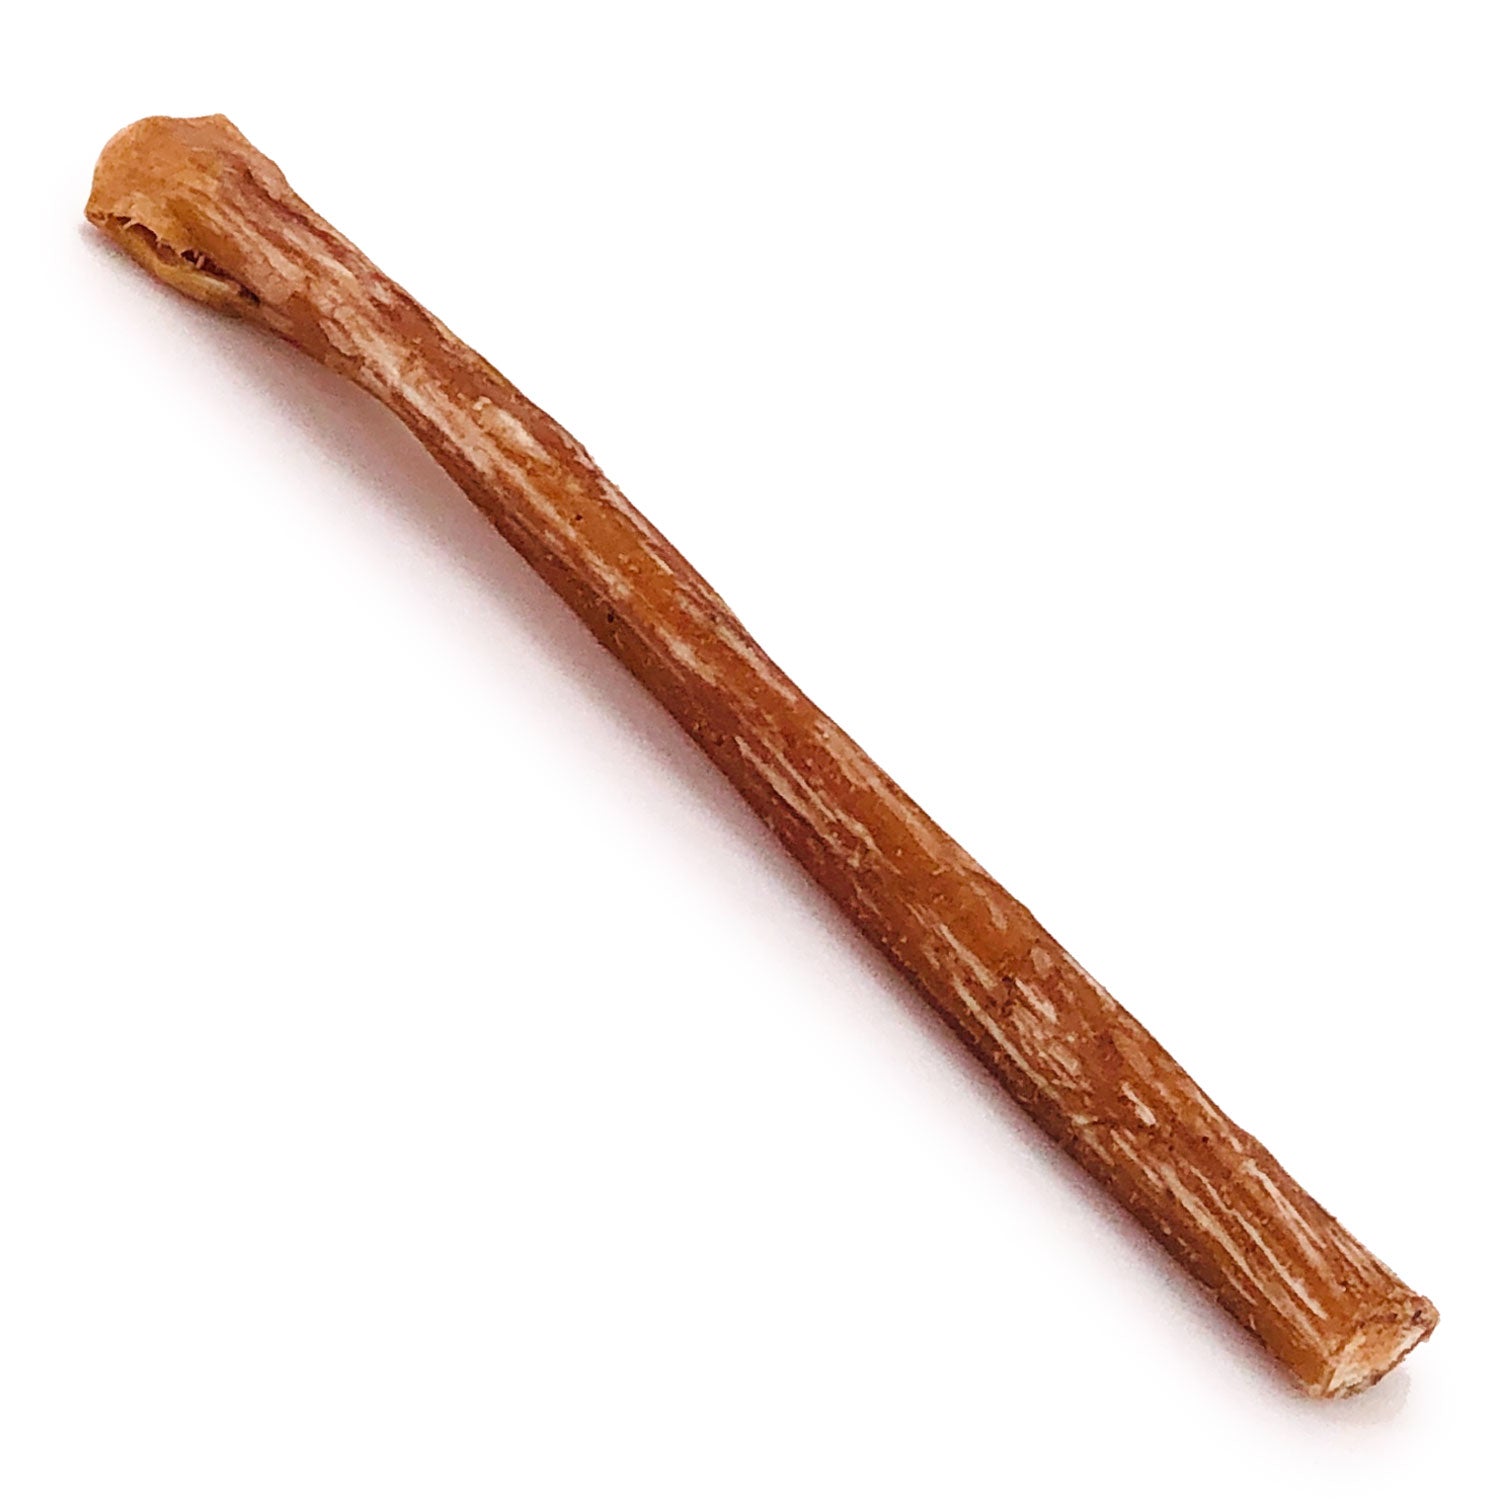 ValueBull Bully Sticks for Small Dogs, Thin 4-6", Varied Shapes, 50 ct